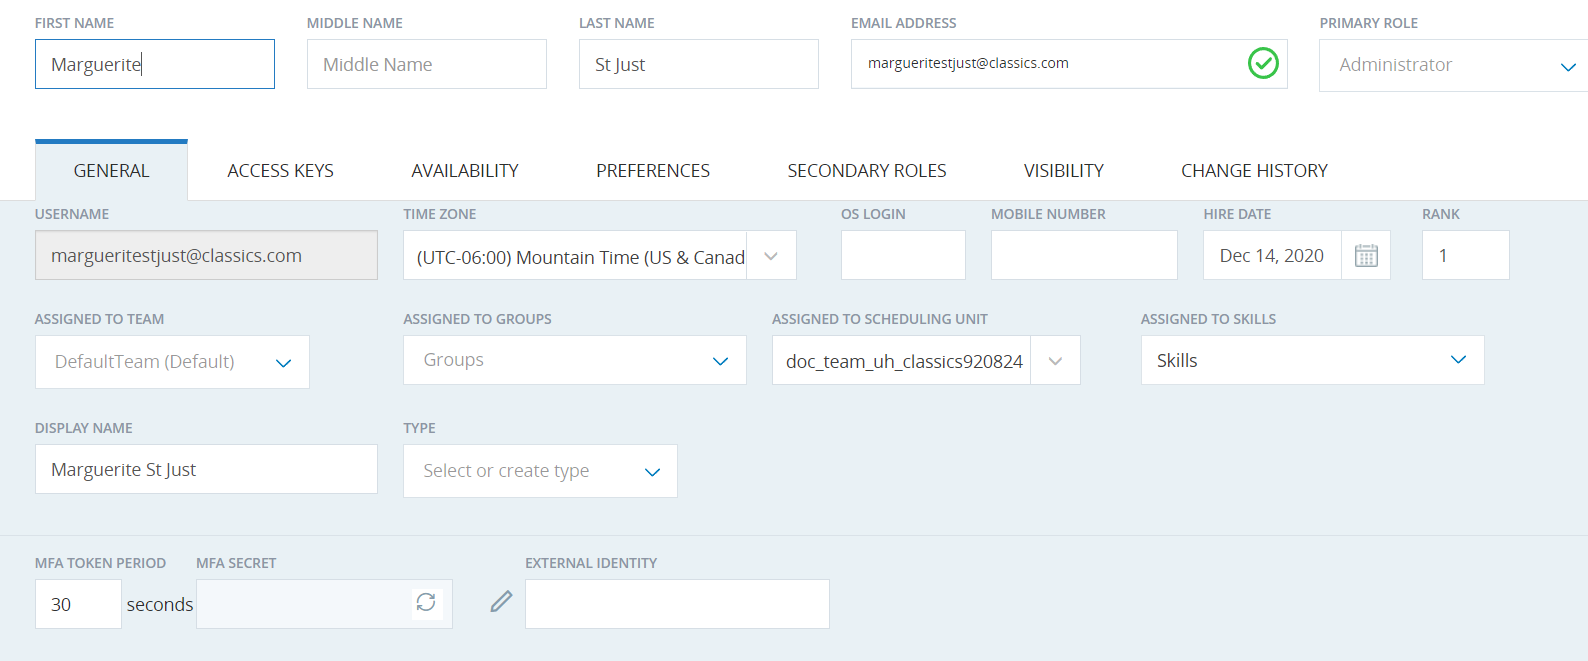 Employee record in CXone showing MFA-specific fields